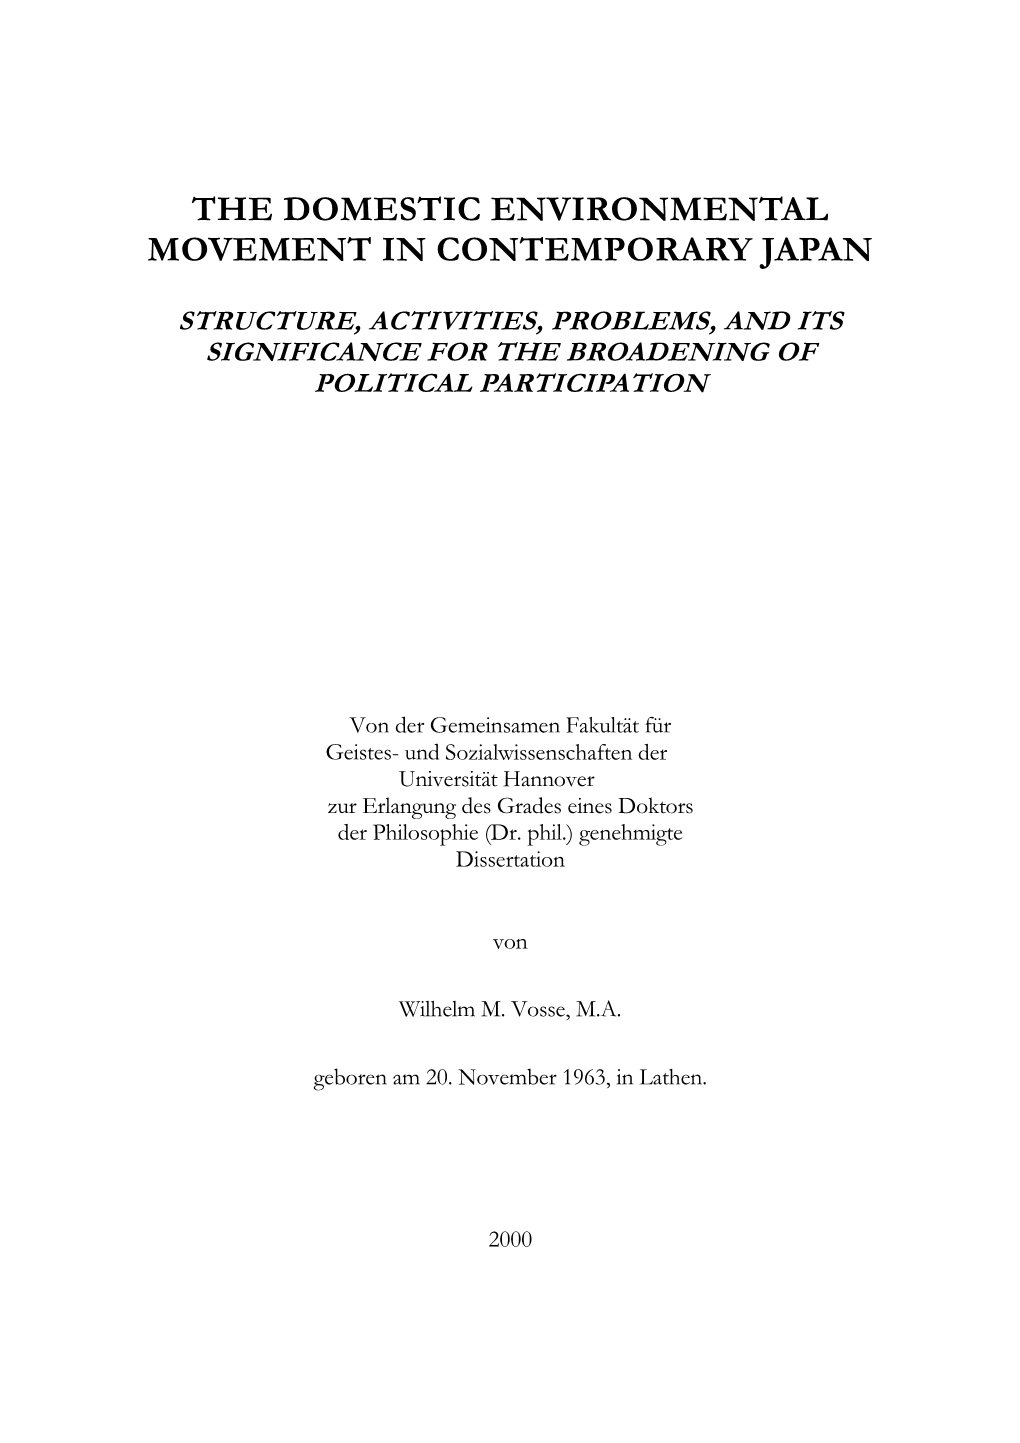 The Domestic Environmental Movement in Contemporary Japan